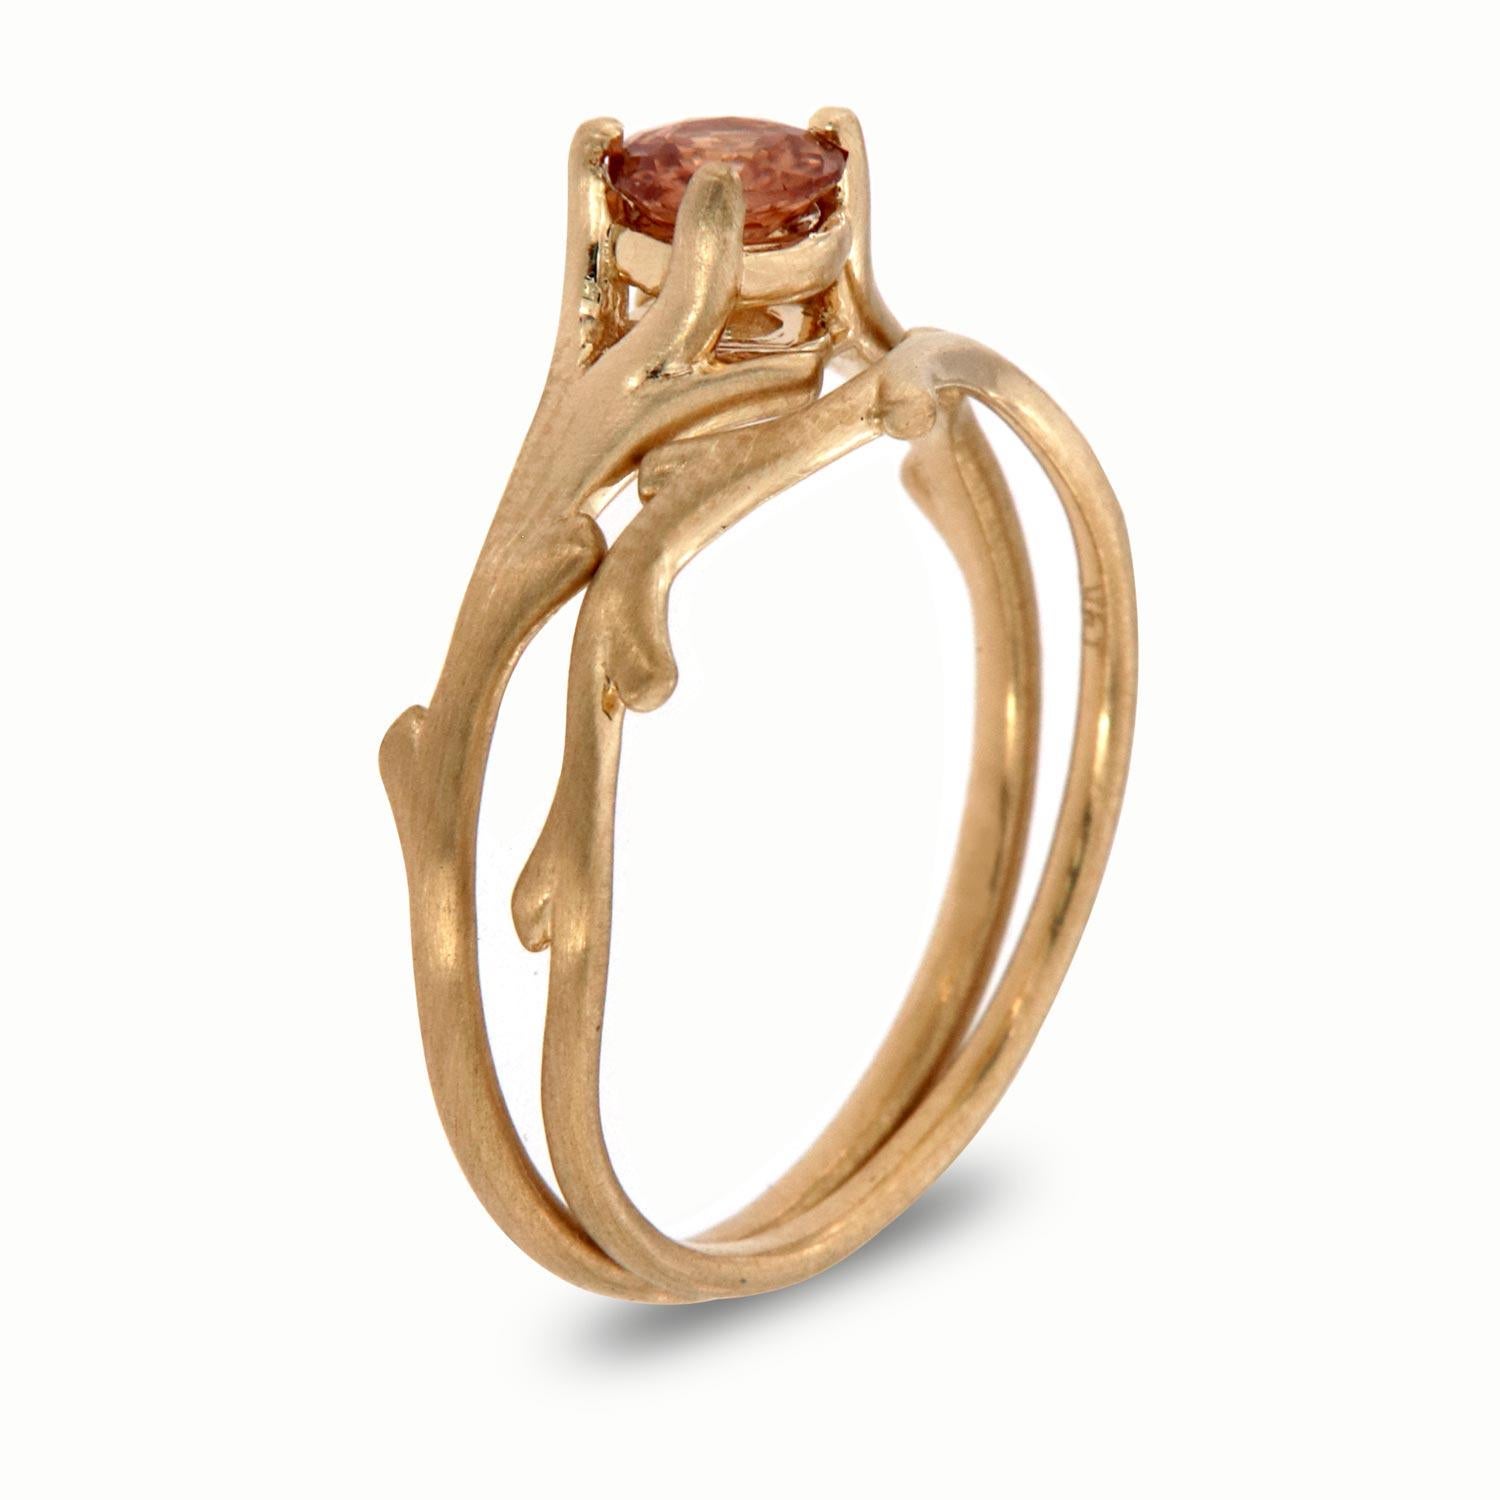 This petite organic designed ring set is impressive in its rustic & vintage appeal, featuring a natural peach round sapphire and matching band. Experience the difference in person!

Product details: 

Center Gemstone Type: SAPPHIRE
Center Gemstone